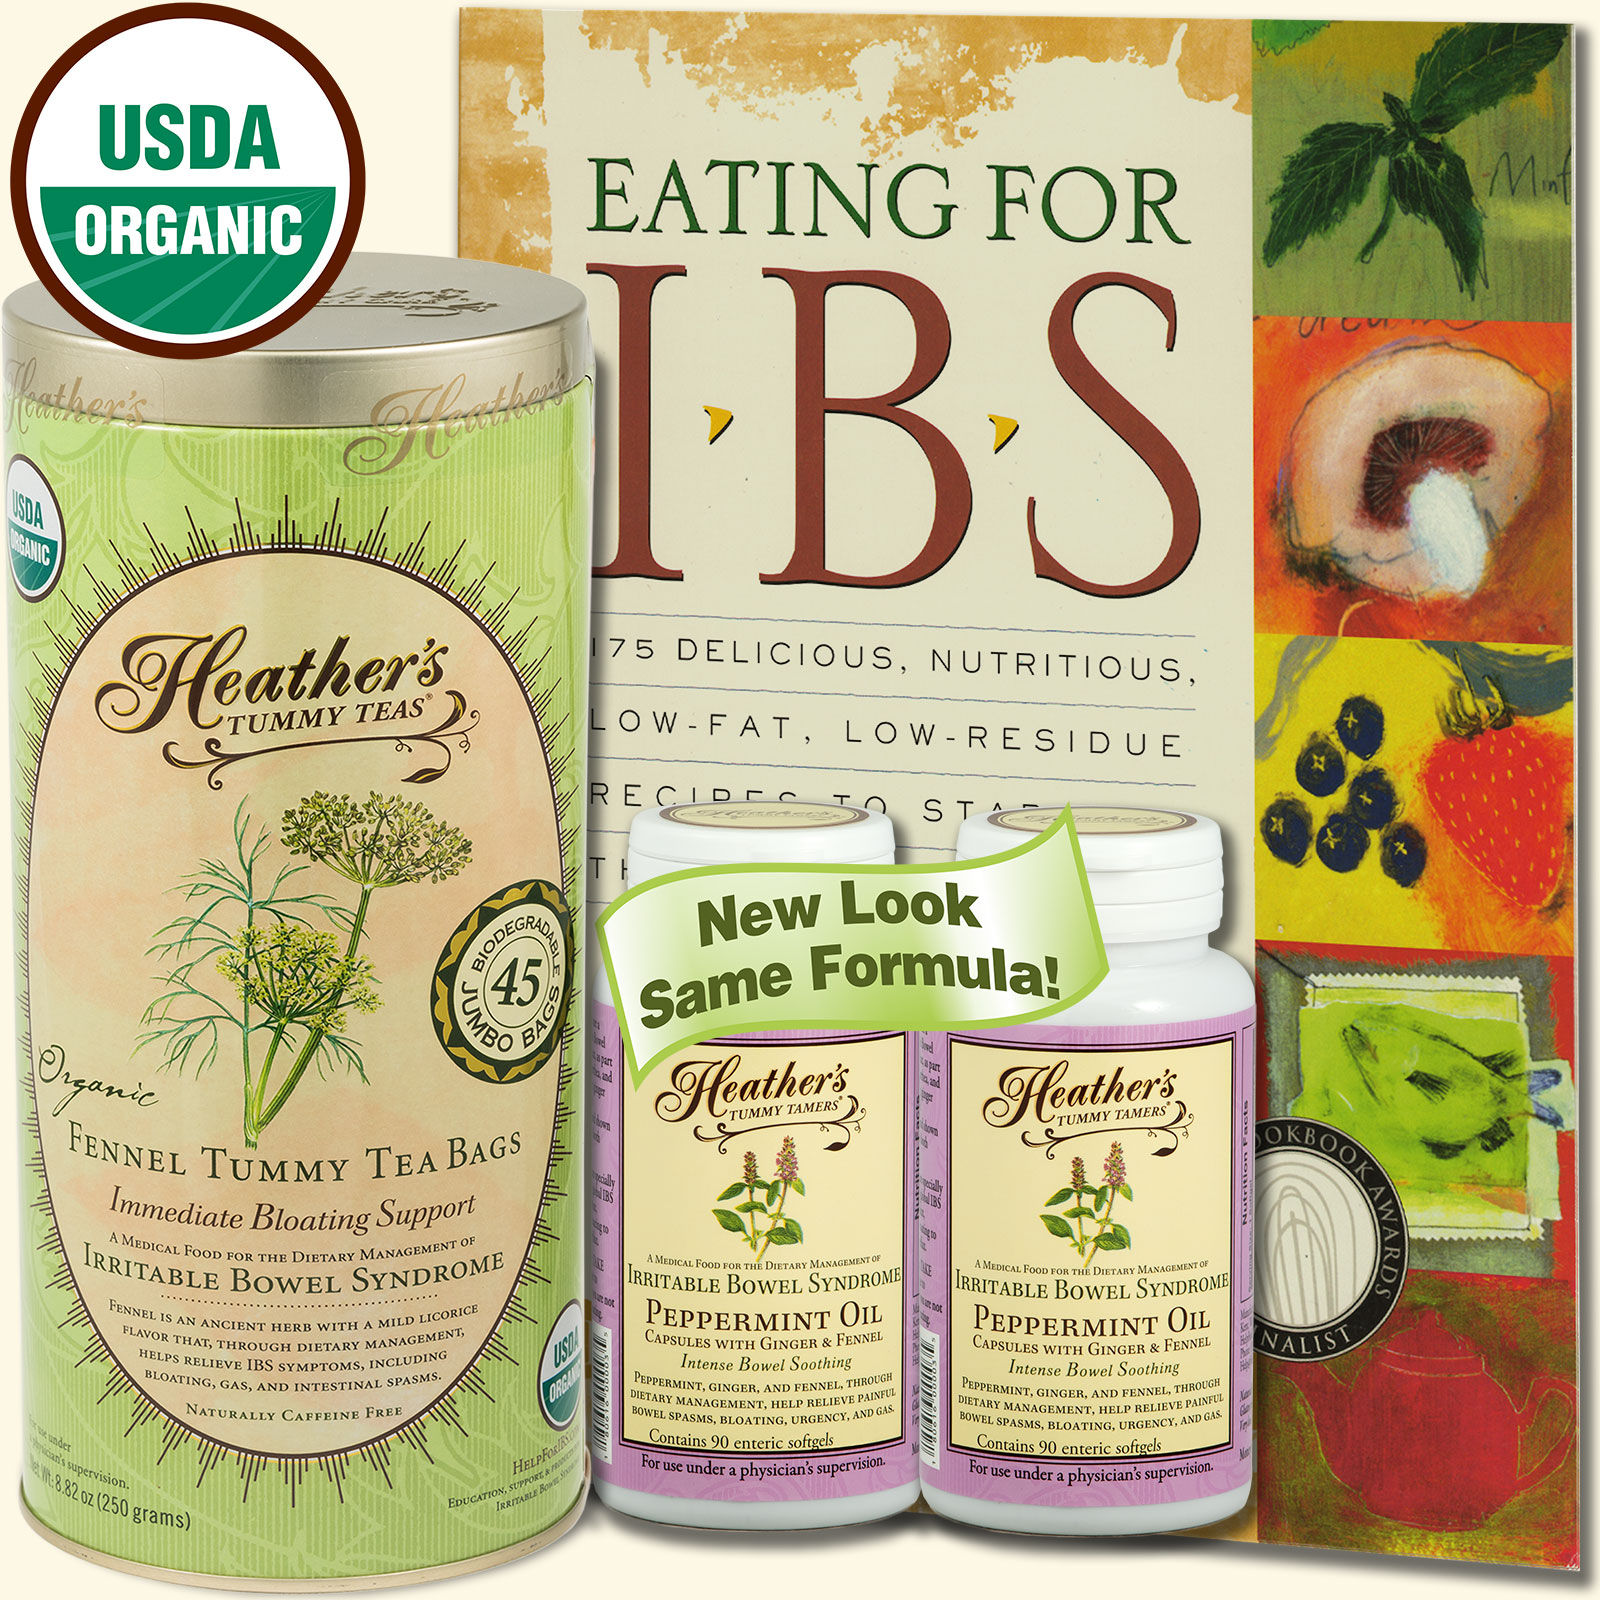 IBS Diet Kit #1:<br>Eating for IBS,<BR>Fennel Tummy  Teabags,<BR>Tummy Tamers Peppermint Caps